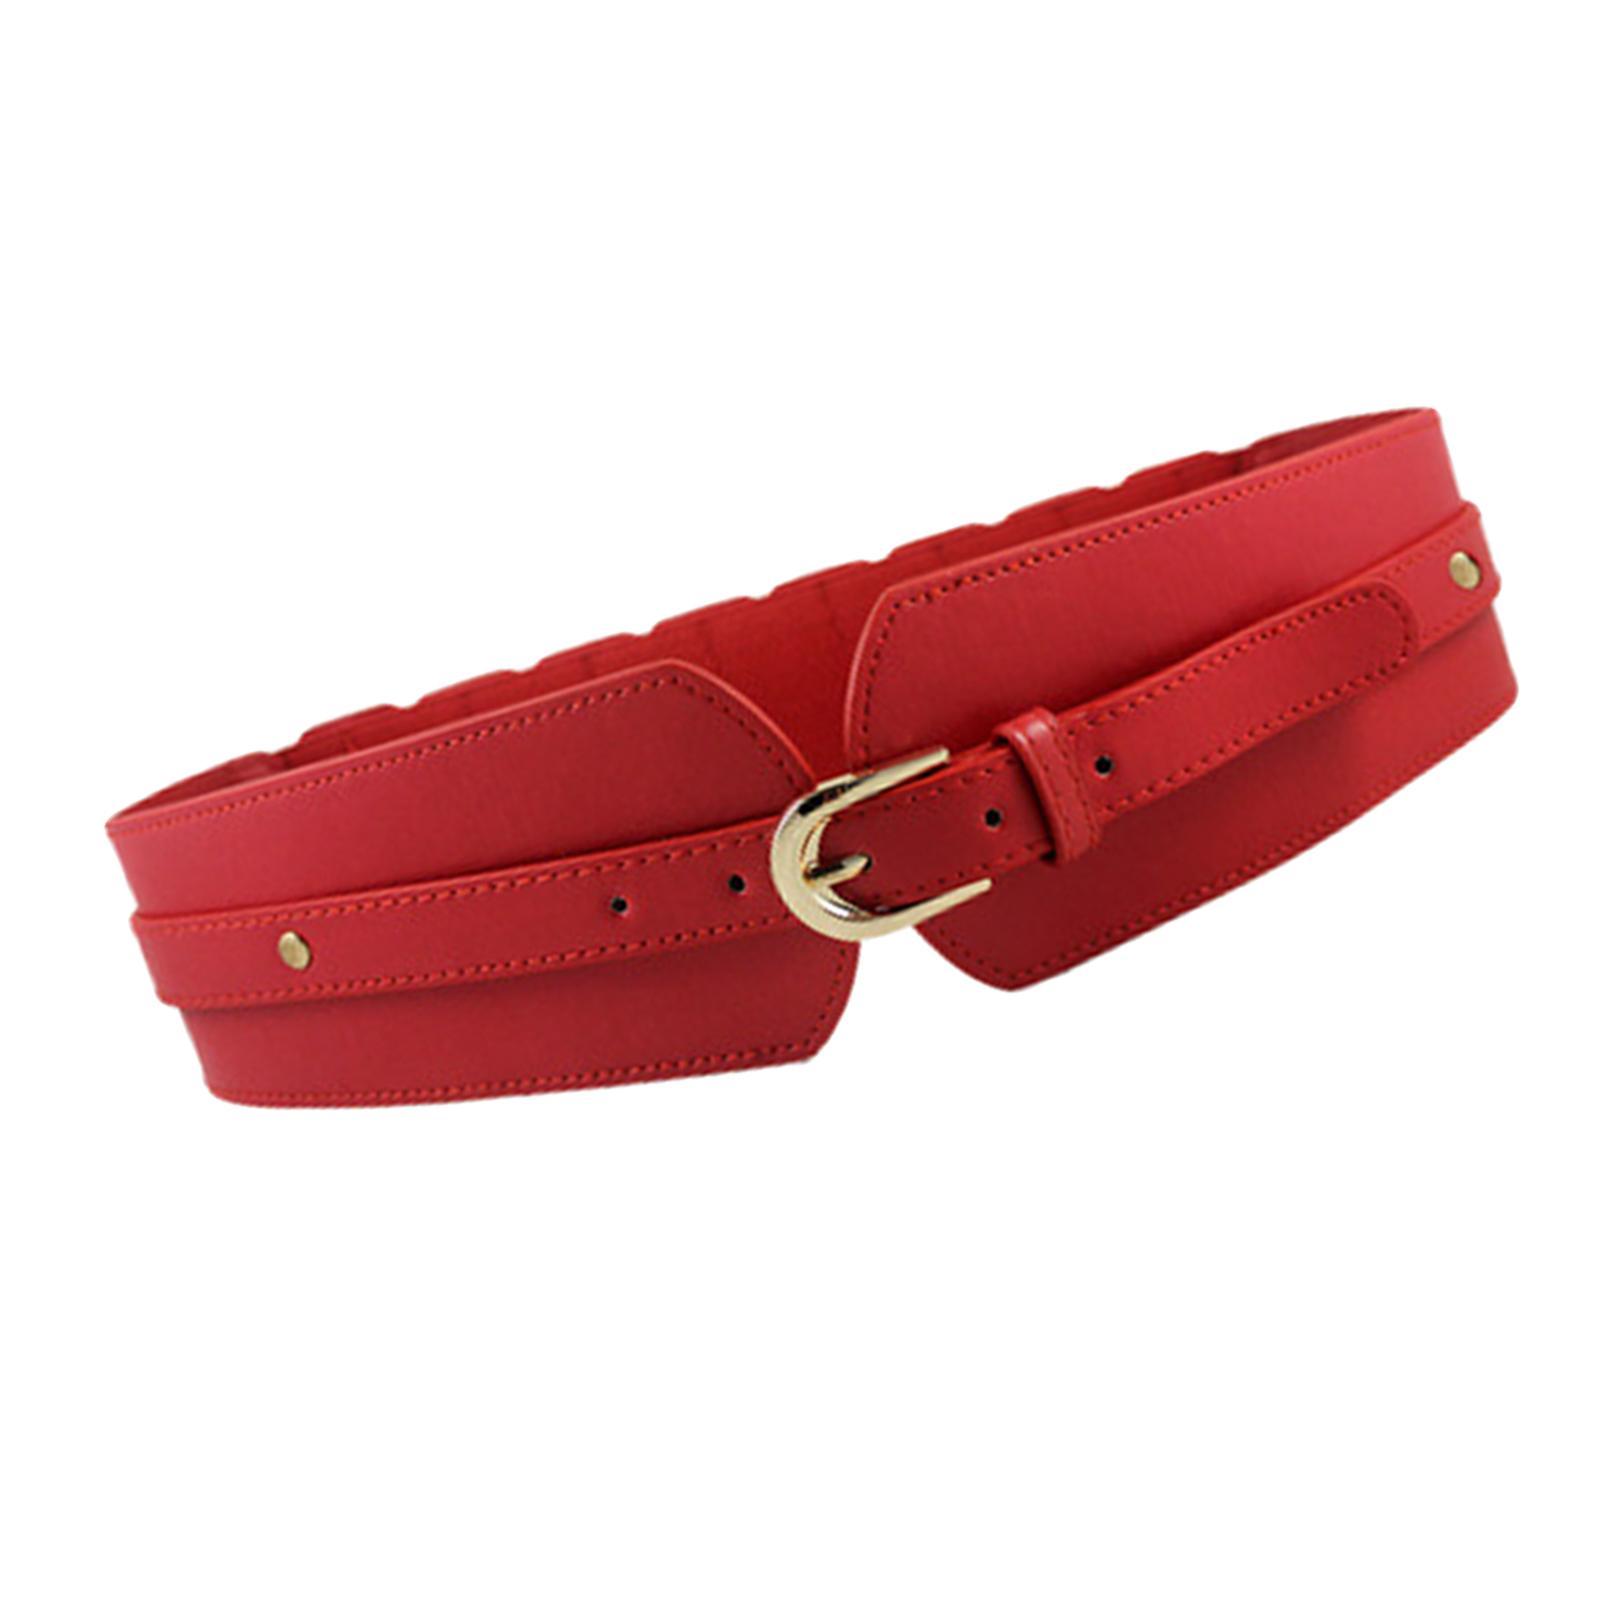 Luxury Women Wide Stretchy Belt PU Leather Fashion for Ladies Coat Blouse